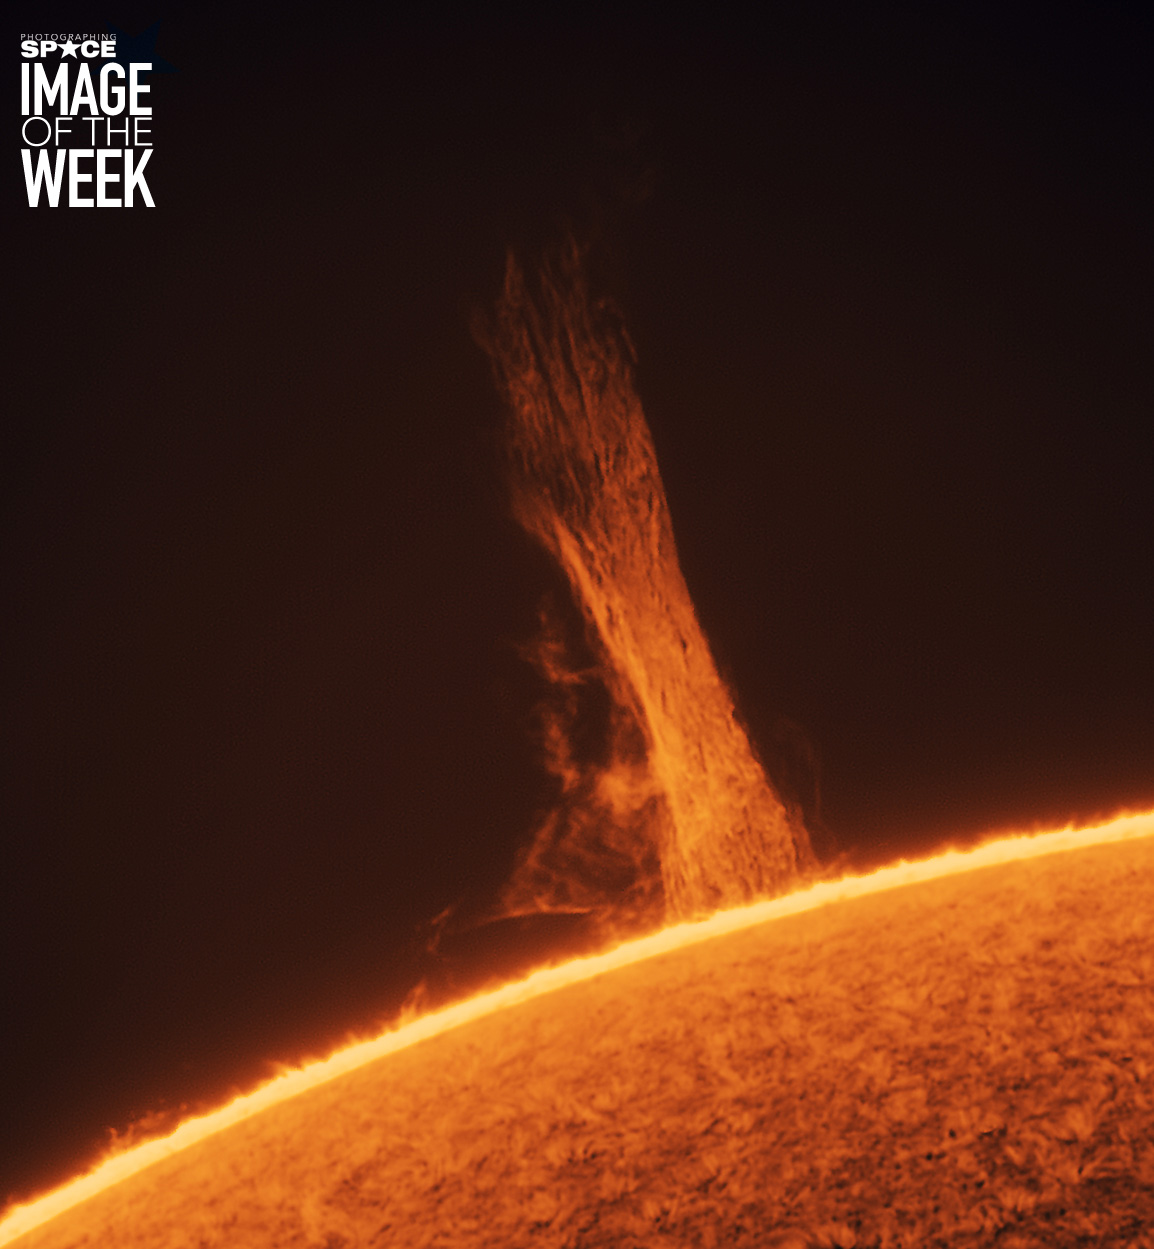 18-08-17-Prominence-web